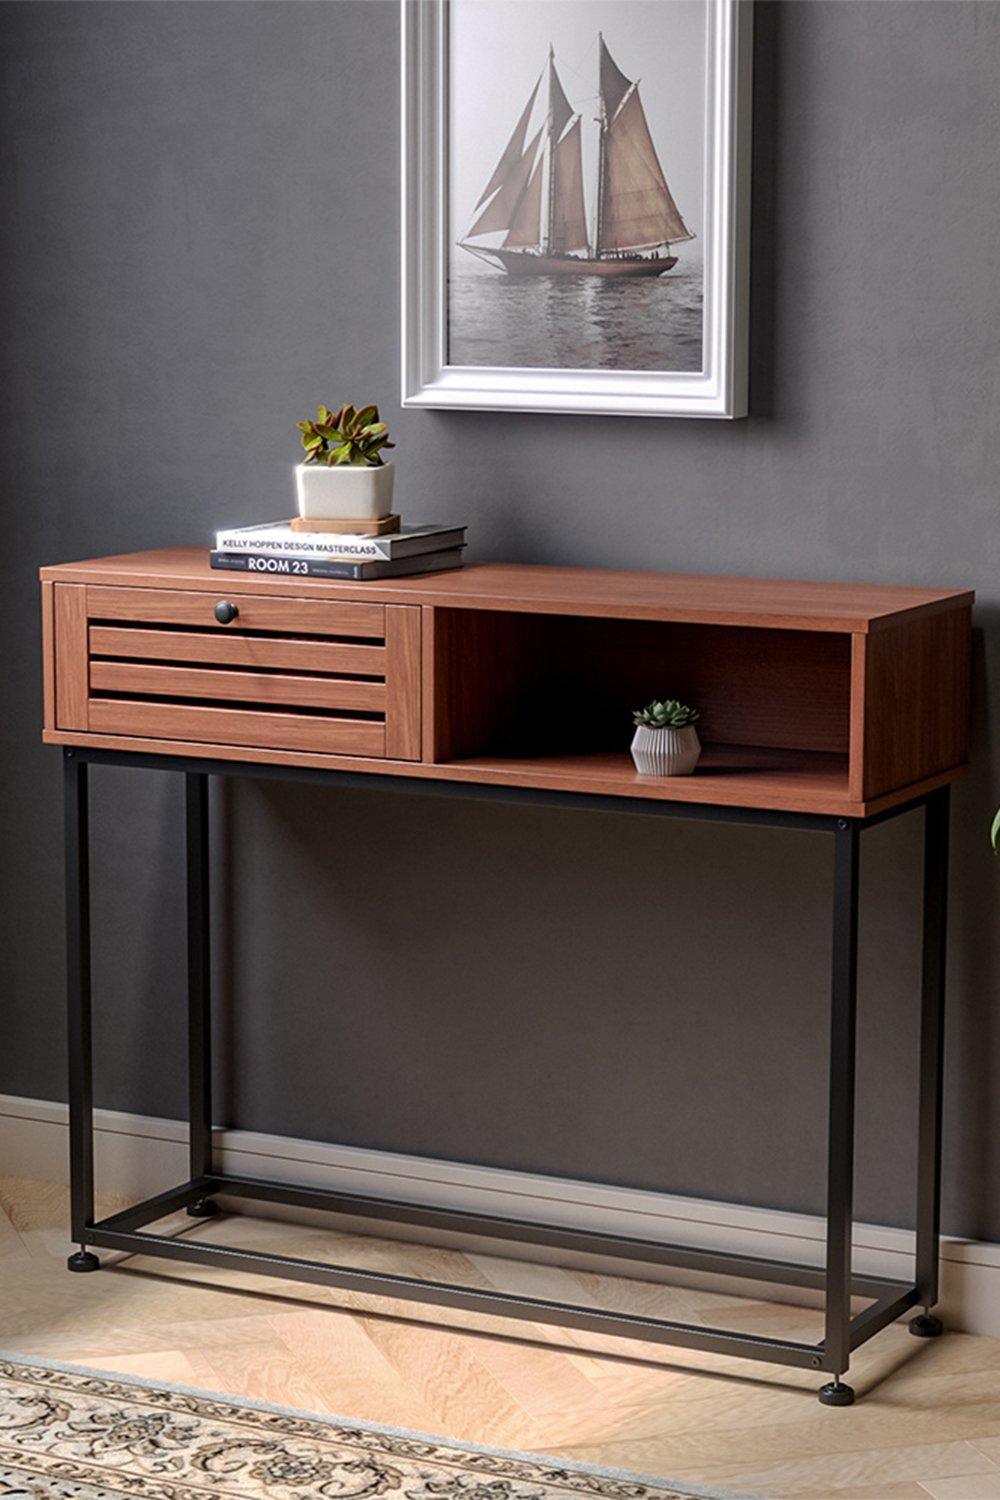 Metallic Console Table for Entryway